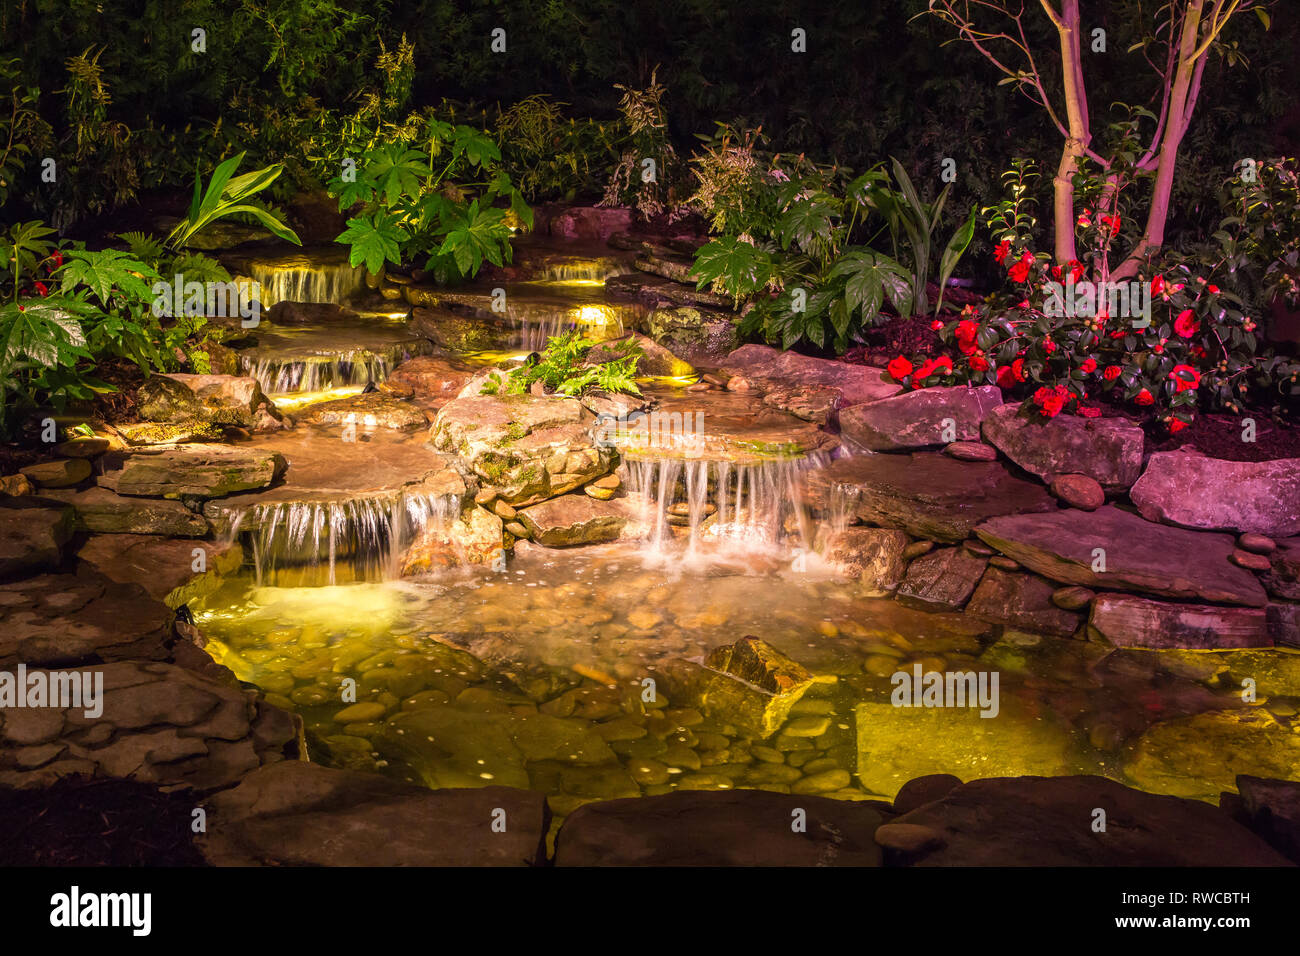 Landscape design featuring waterfalls, plants and dramatic lighting. Stock Photo